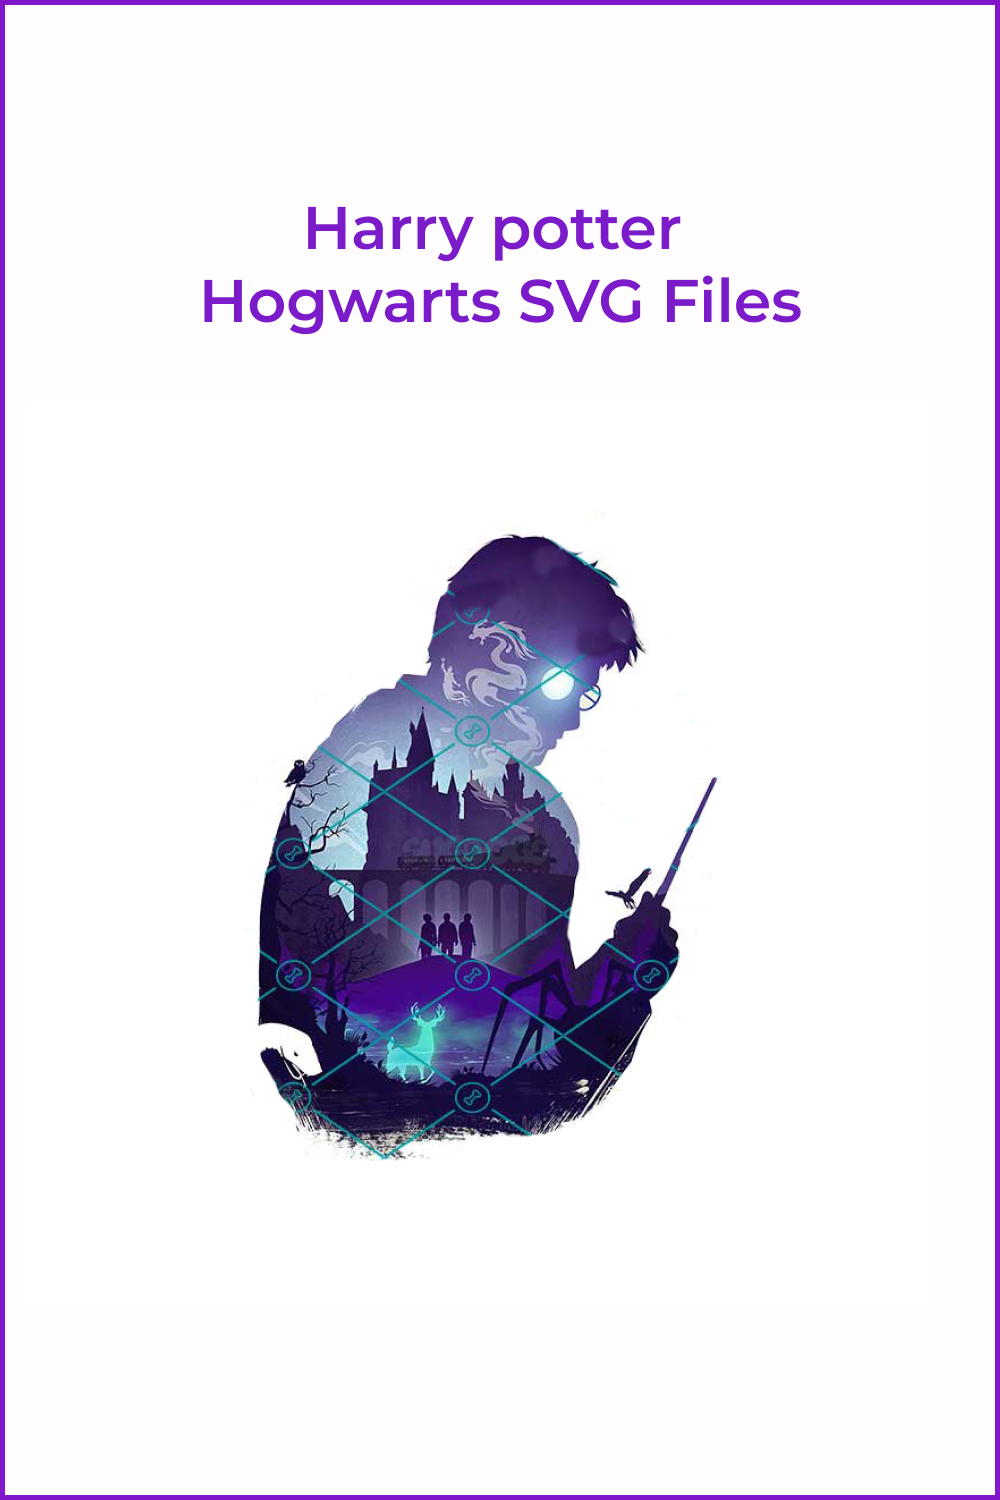 Harry Potter silhouette with image of Hogwarts inside.